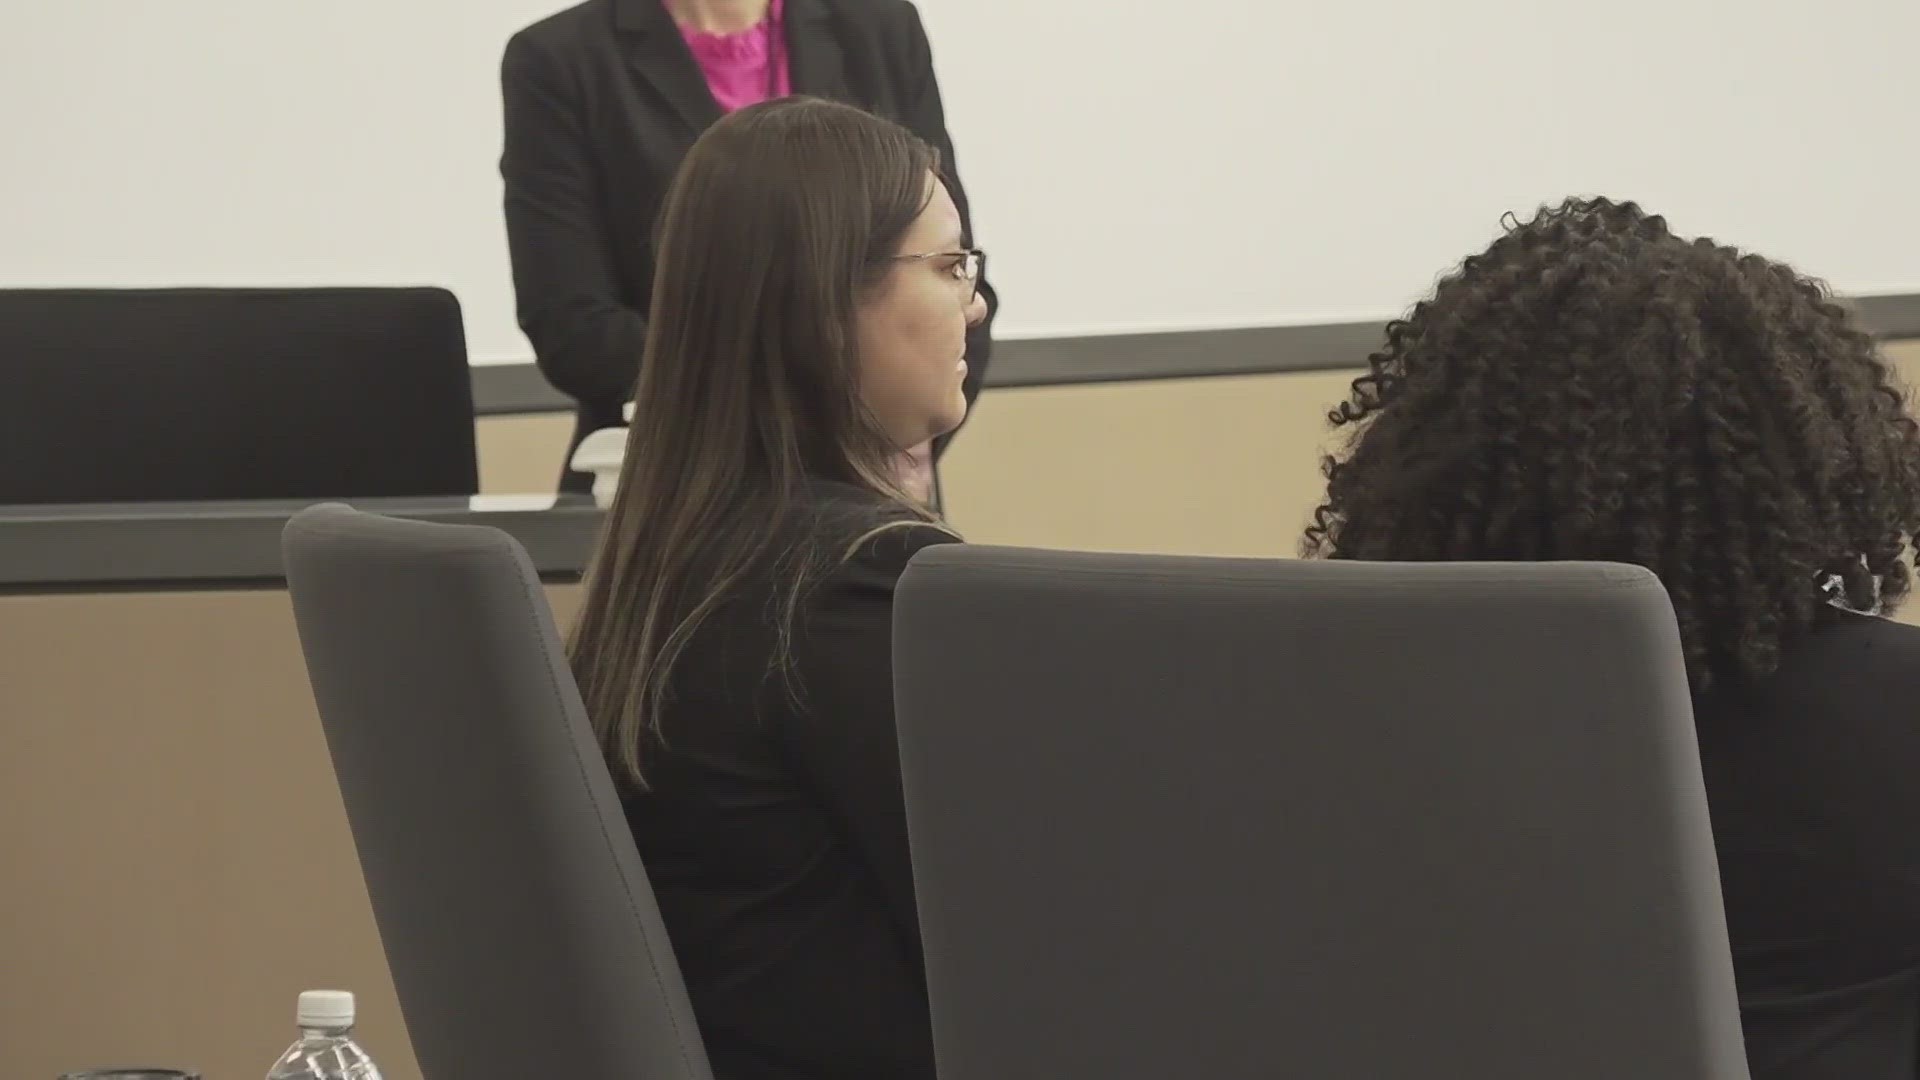 After two hours of deliberation, a jury in Lovington found Avila guilty. She will be sentenced on May 1.